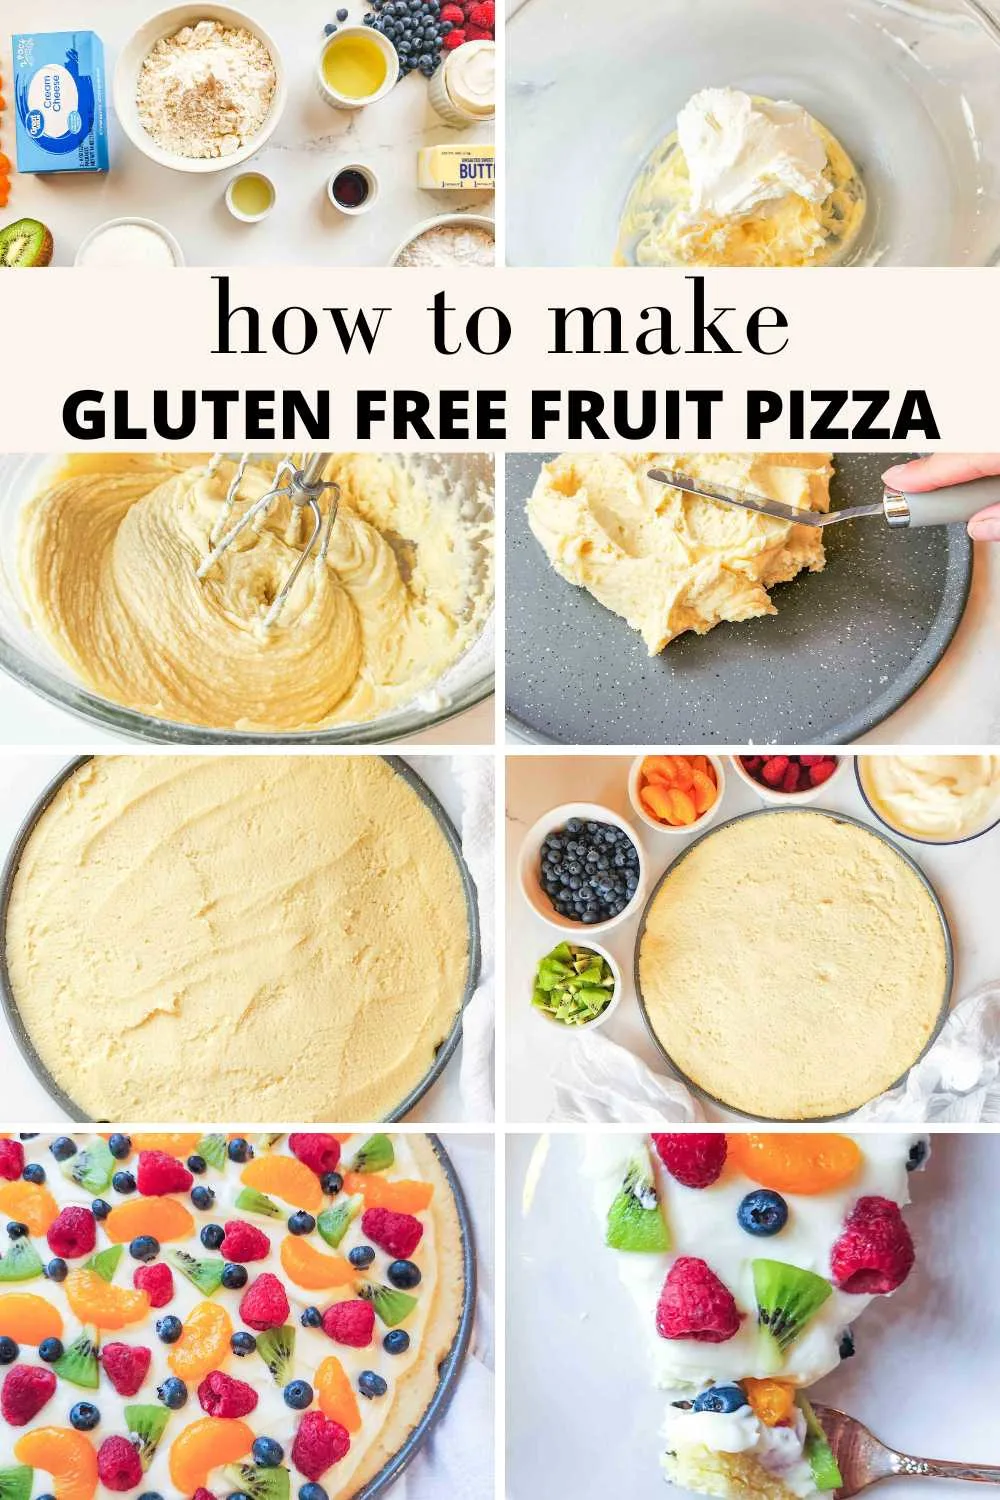 Picture grid showing how to make gluten free fruit pizza: 1. gather ingredients 2. mix butter and sour cream. 3. mix in remaining ingredients with a hand mixer. 4. Spread cookie dough onto a pizza pan (the dough is sticky) 5. bake. 6. frost and top with fruit. 7. complete fruit pizza is shown. 8.  a slice of fruit pizza with a bite shown. It is soft and chewy.